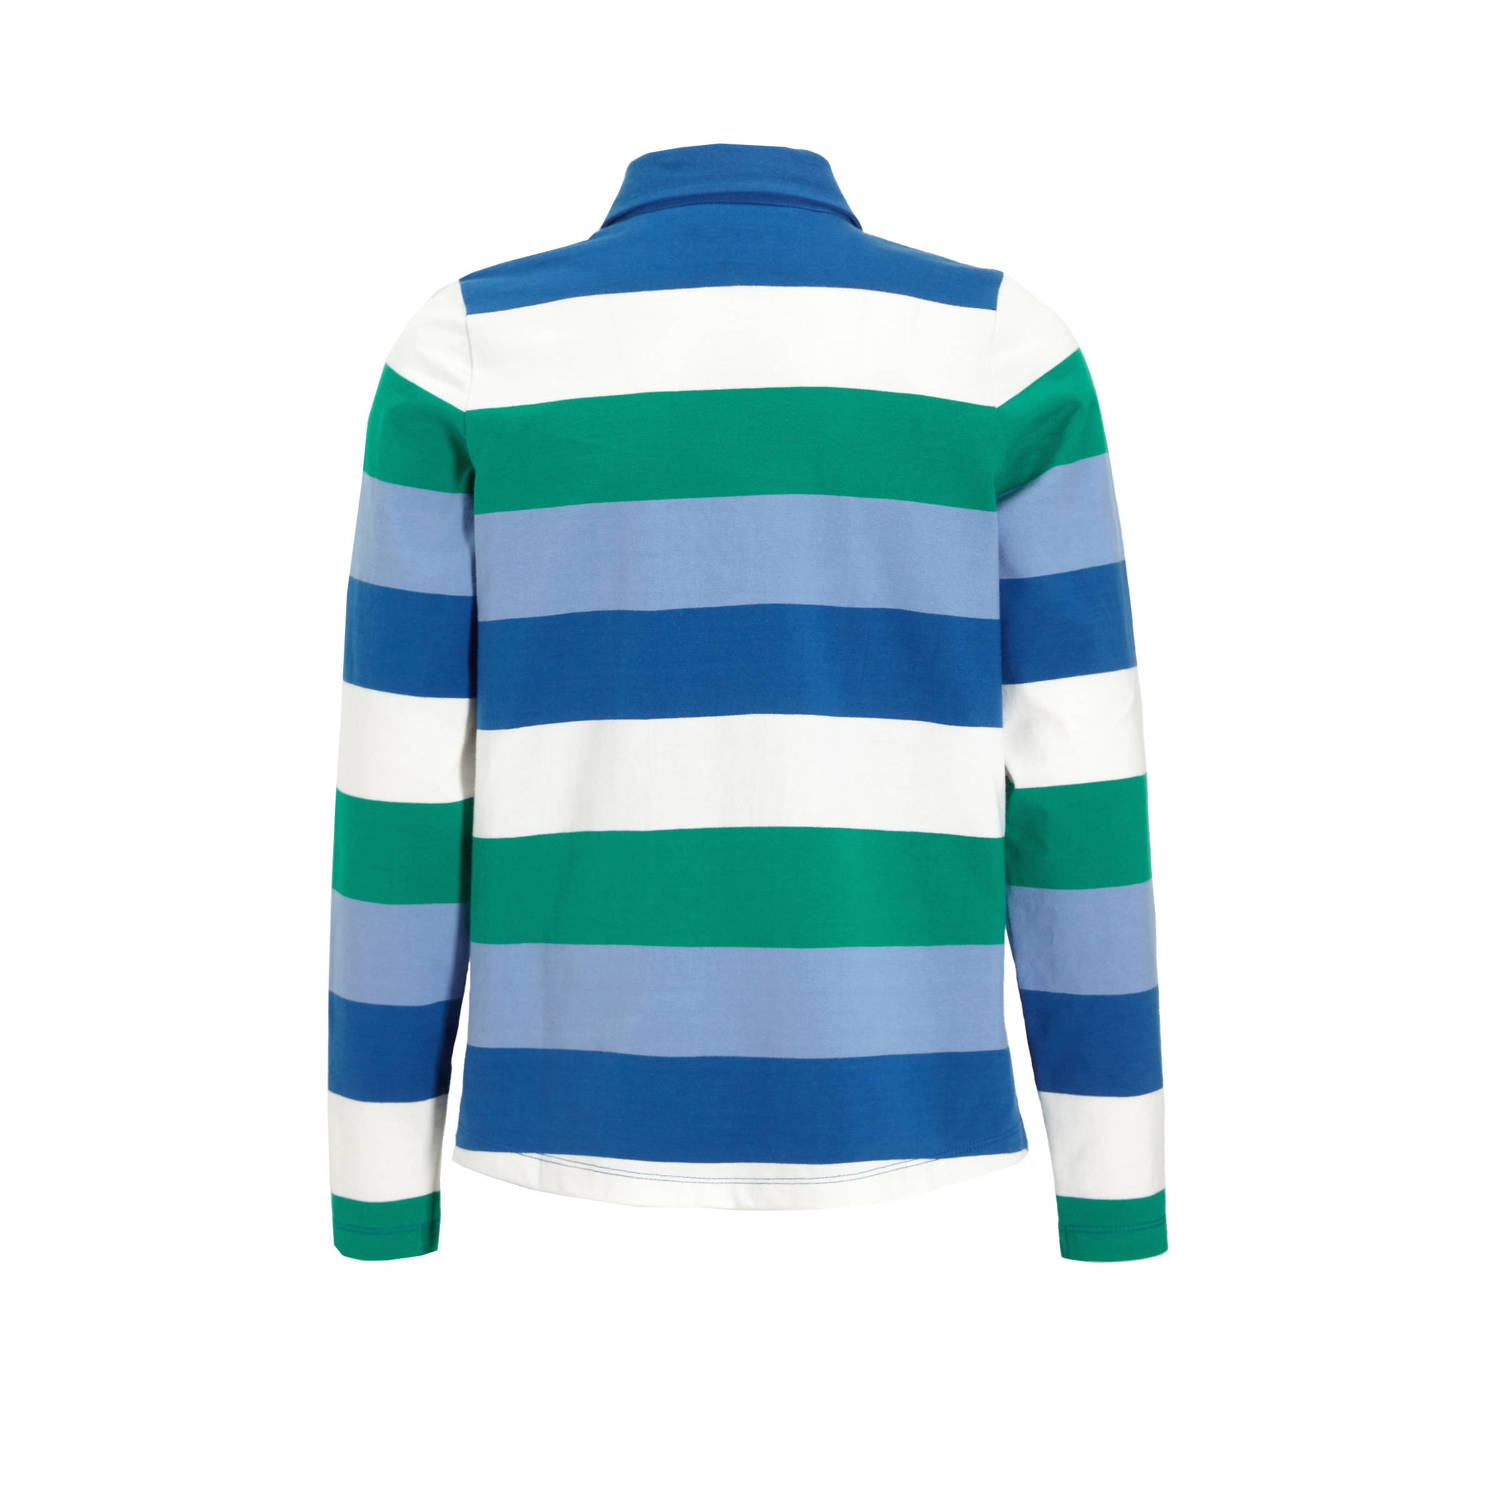 anytime rugby trui blauw groen